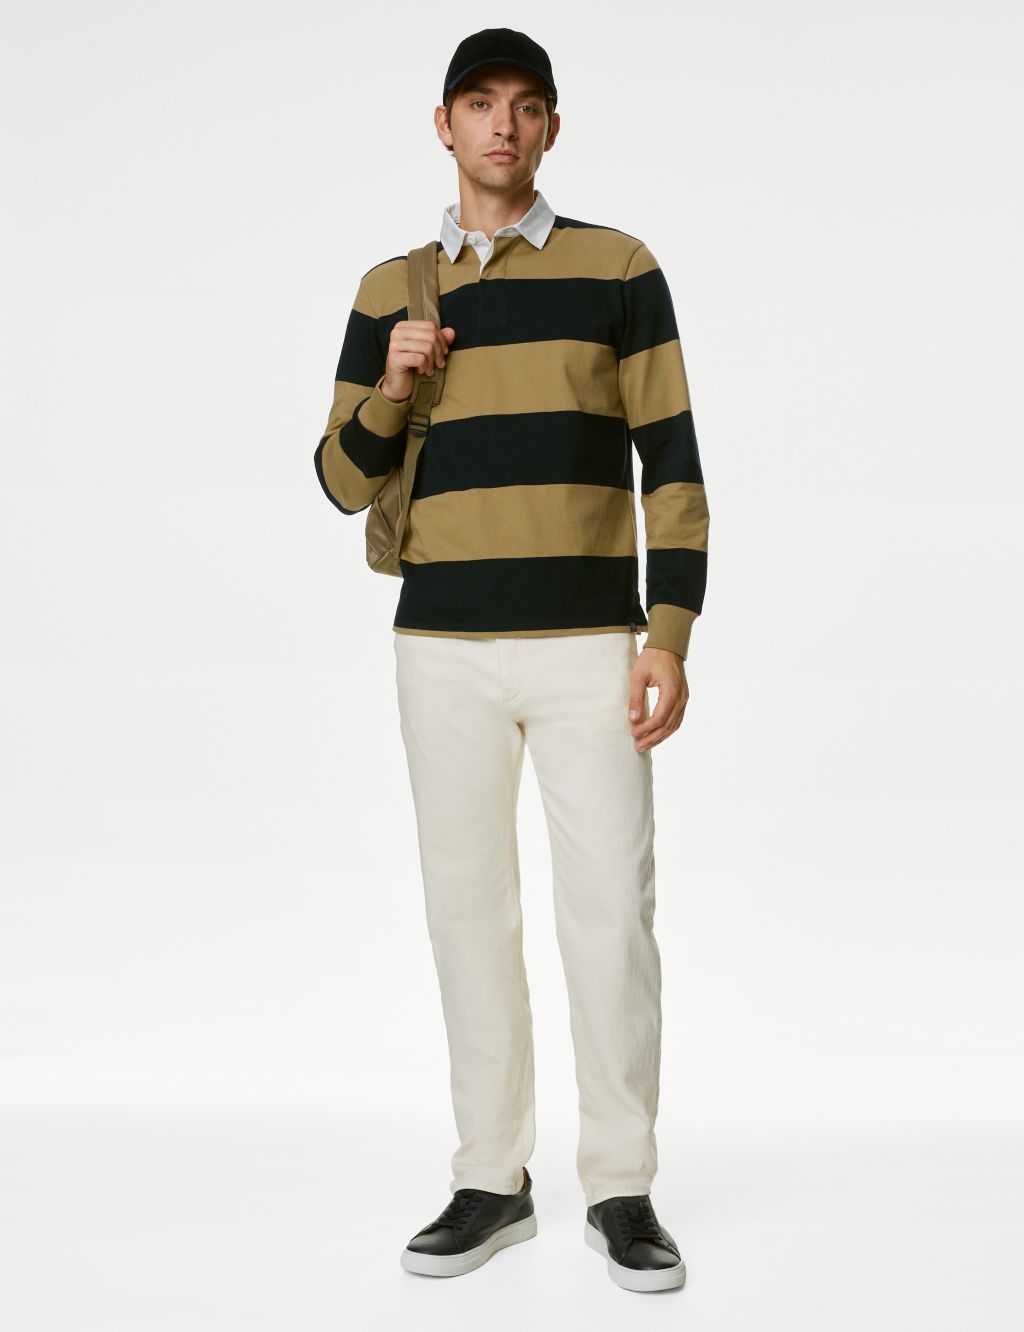 Pure Cotton Striped Rugby Shirt image 4